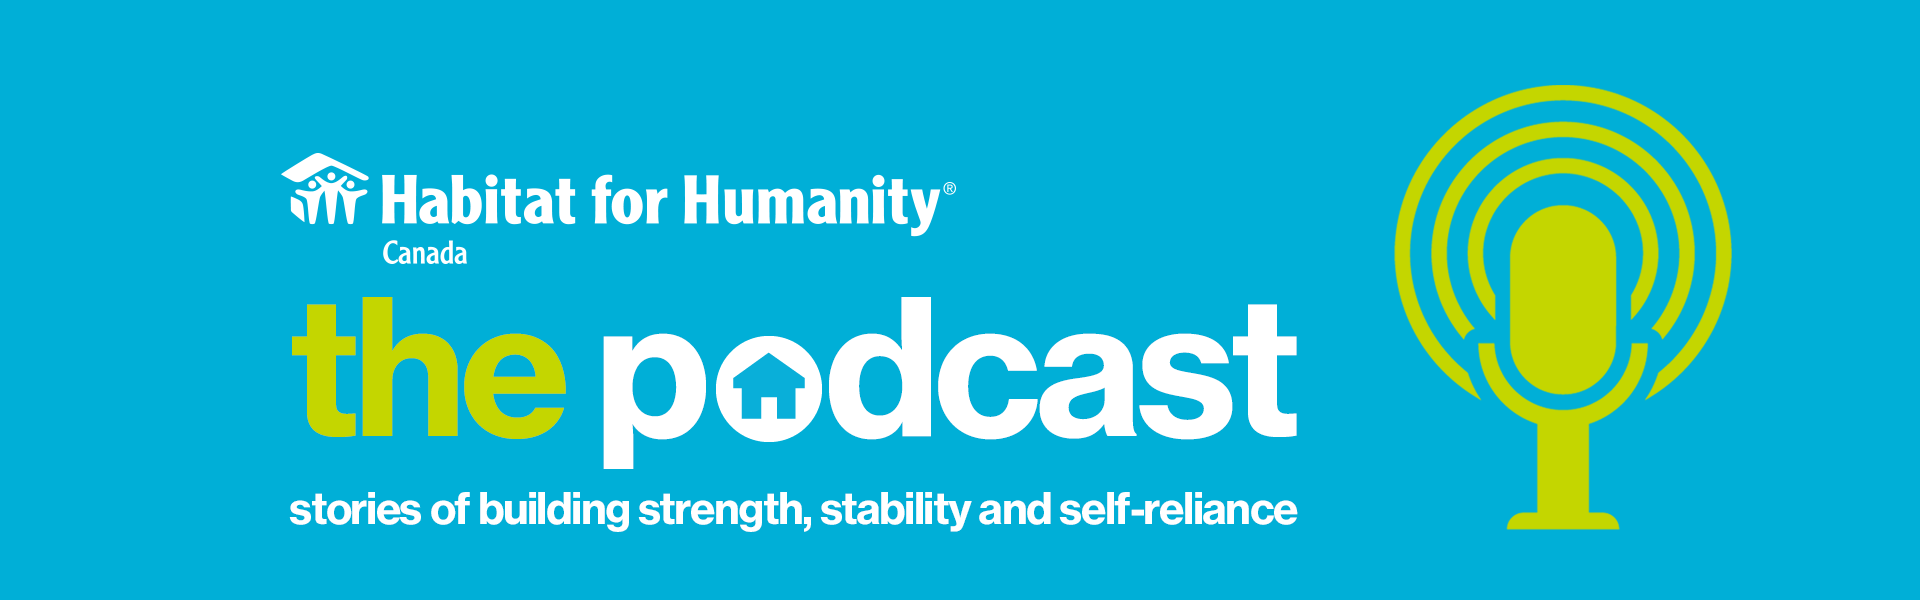 Habitat for Humanity Canada - The Podcast: stories of building strength, stability and self-reliance